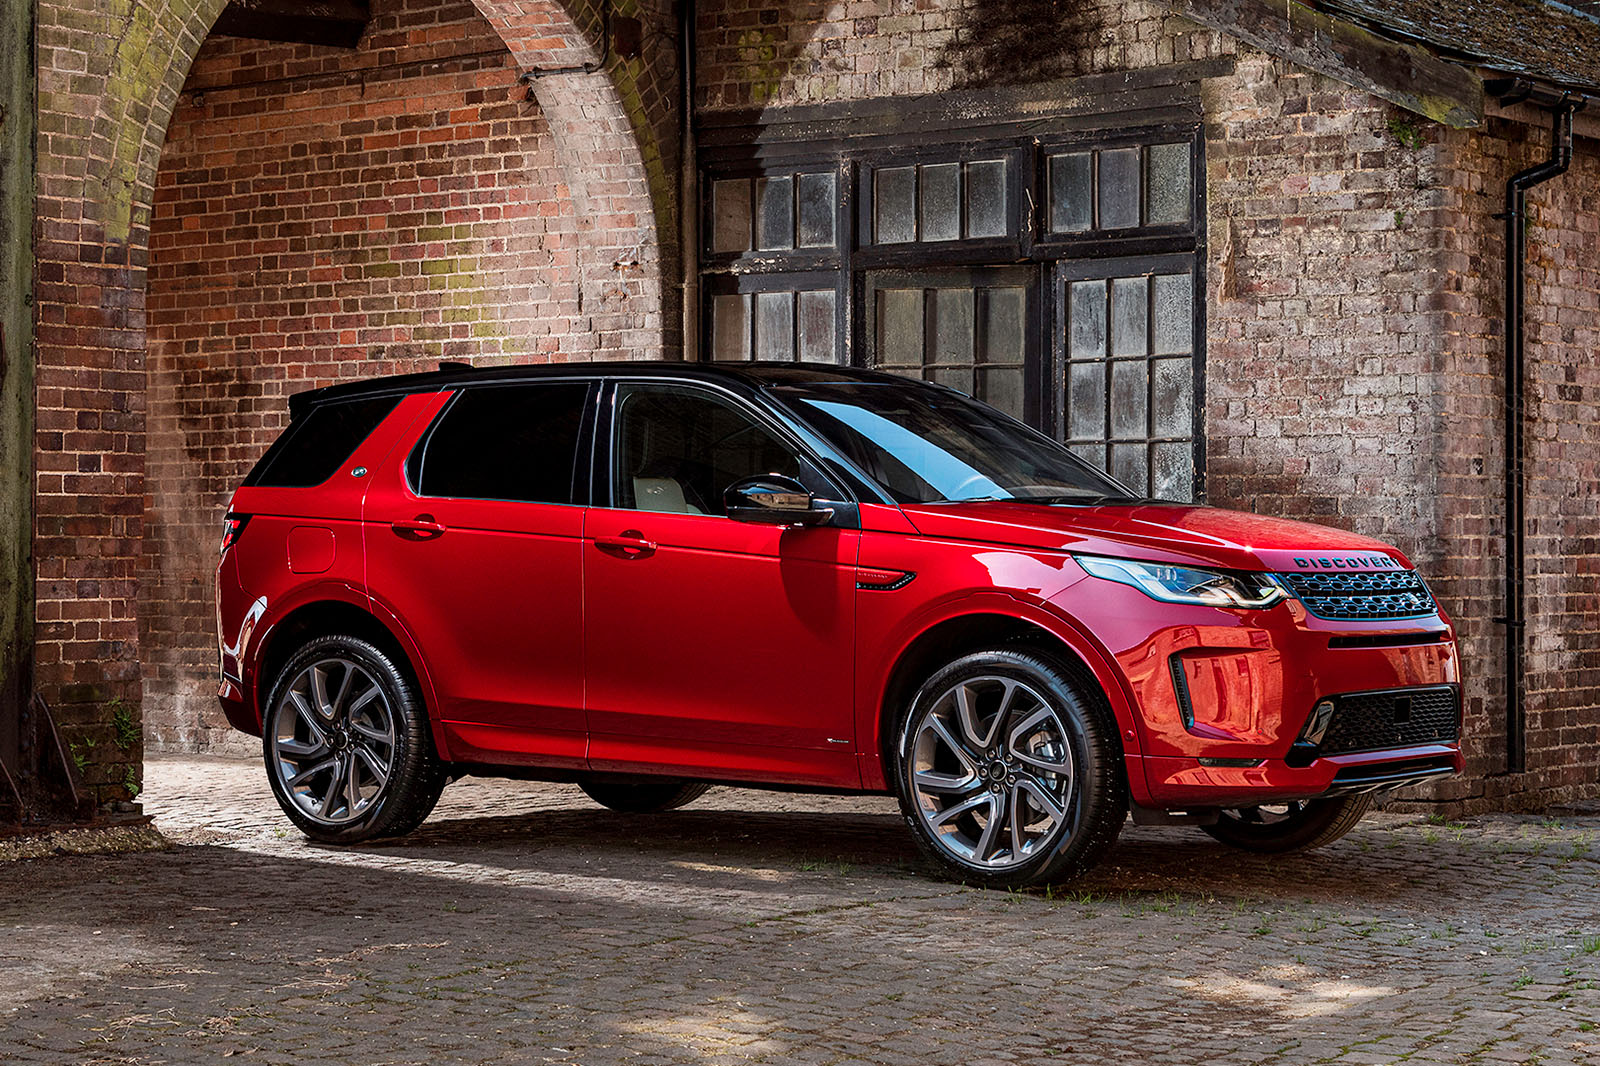 2020 Land Rover Discovery sports, RR Evoque Delivery begins.